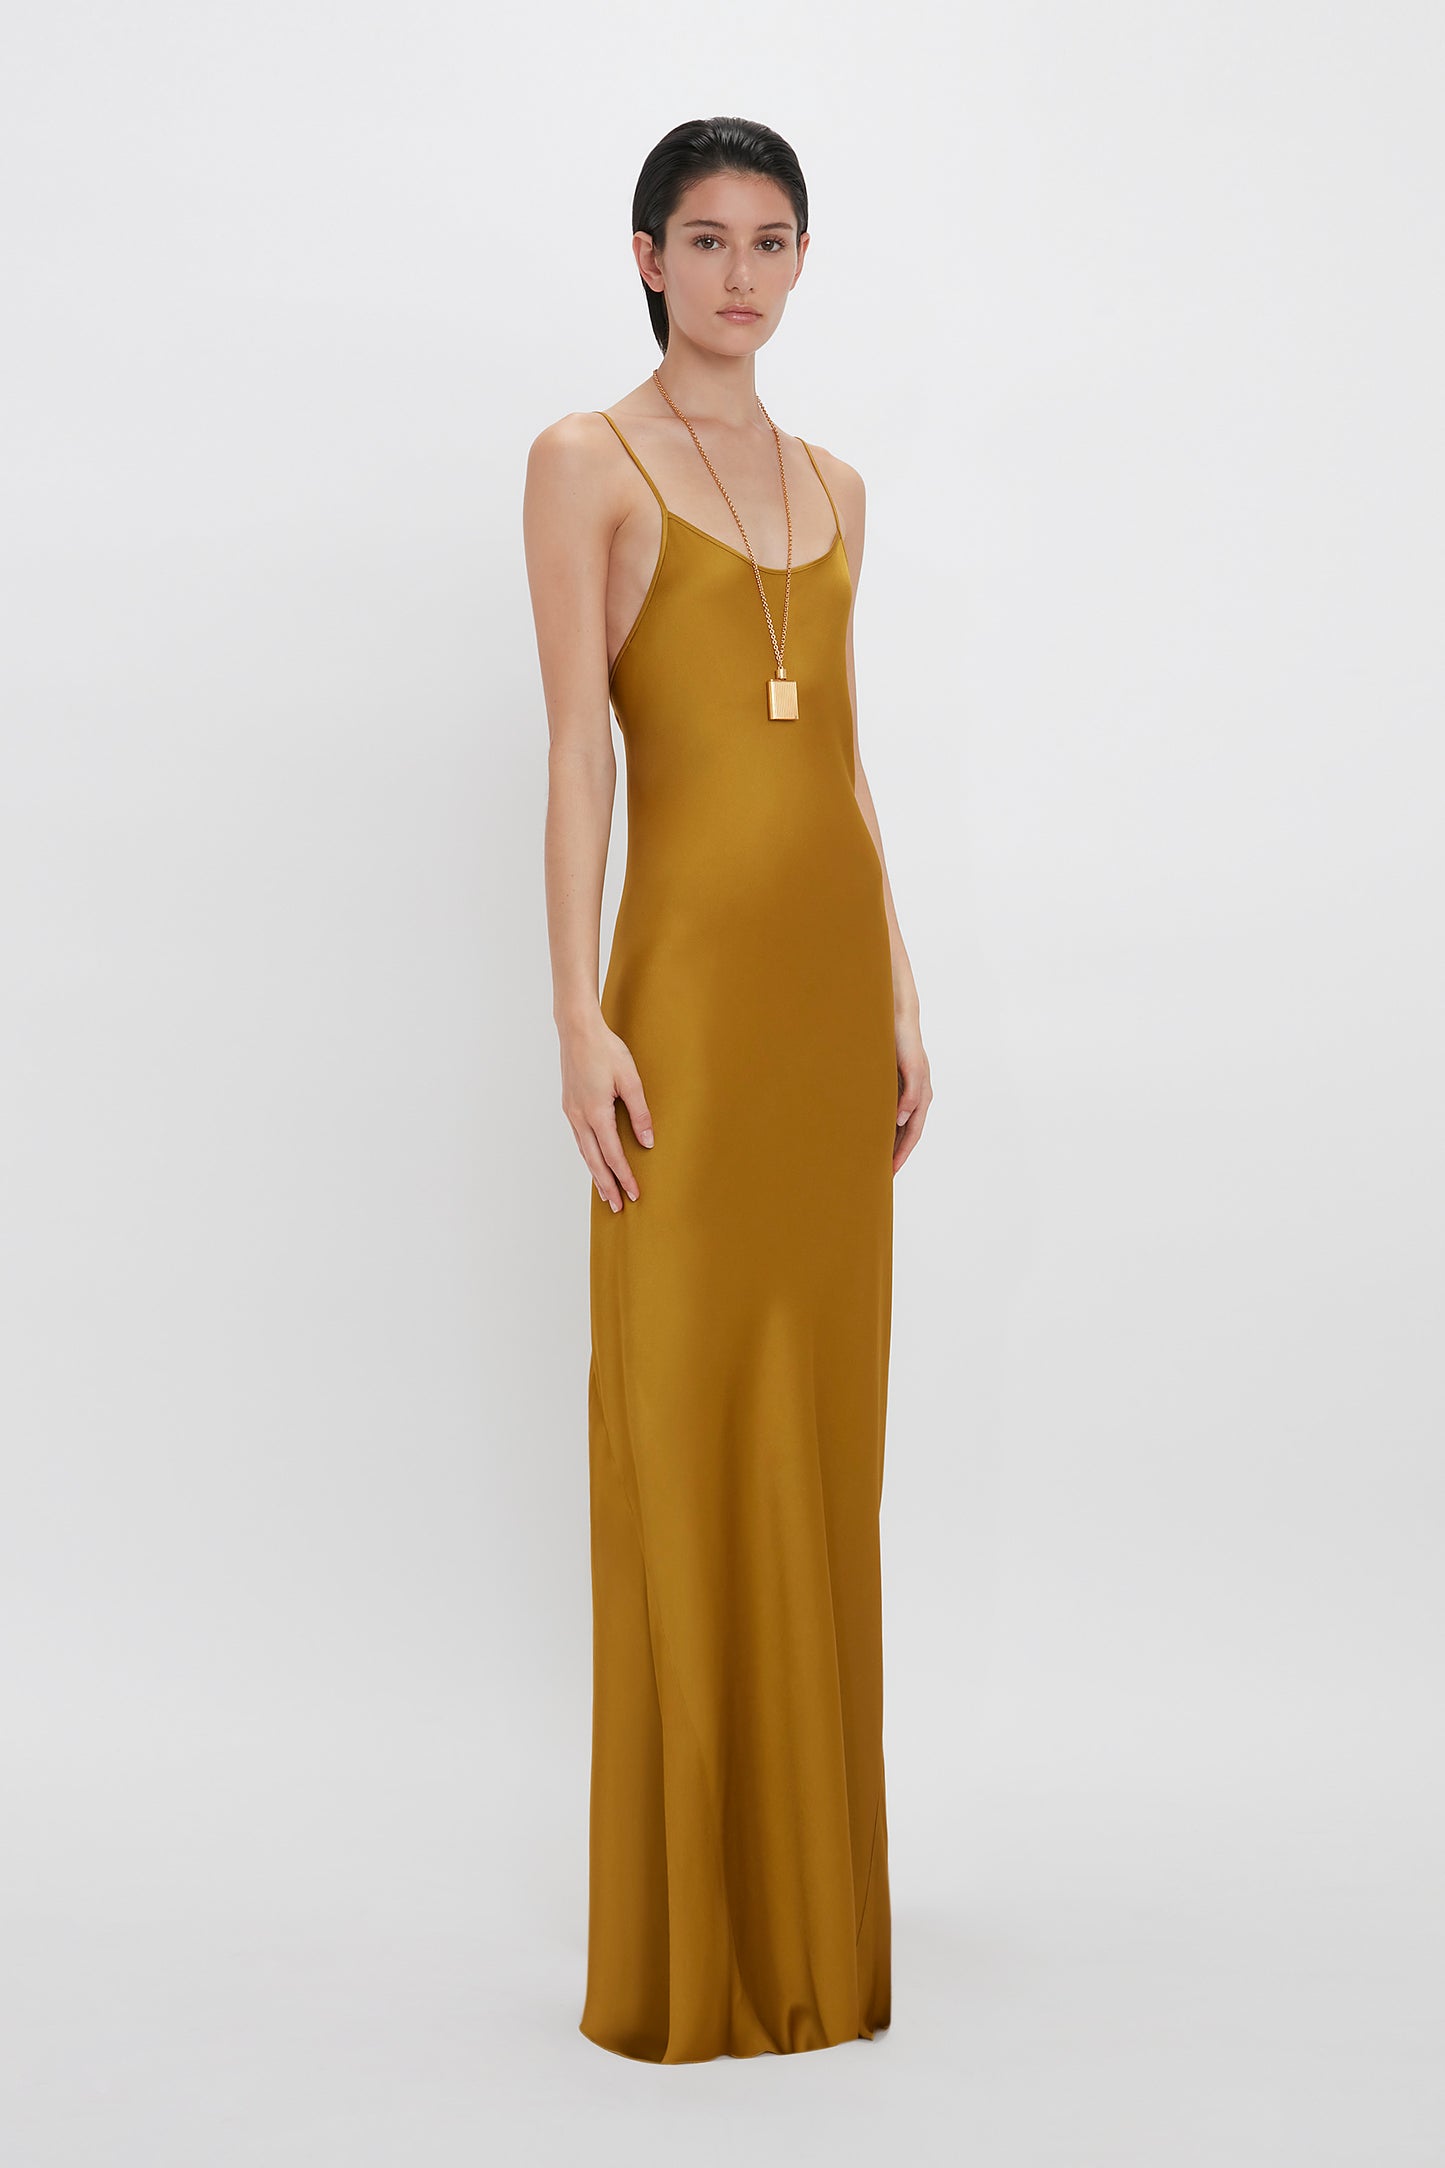 A woman in a long, mustard-colored Victoria Beckham Low Back Cami Floor-Length Dress In Harvest Gold with thin straps, standing against a white background. She wears a long gold necklace.